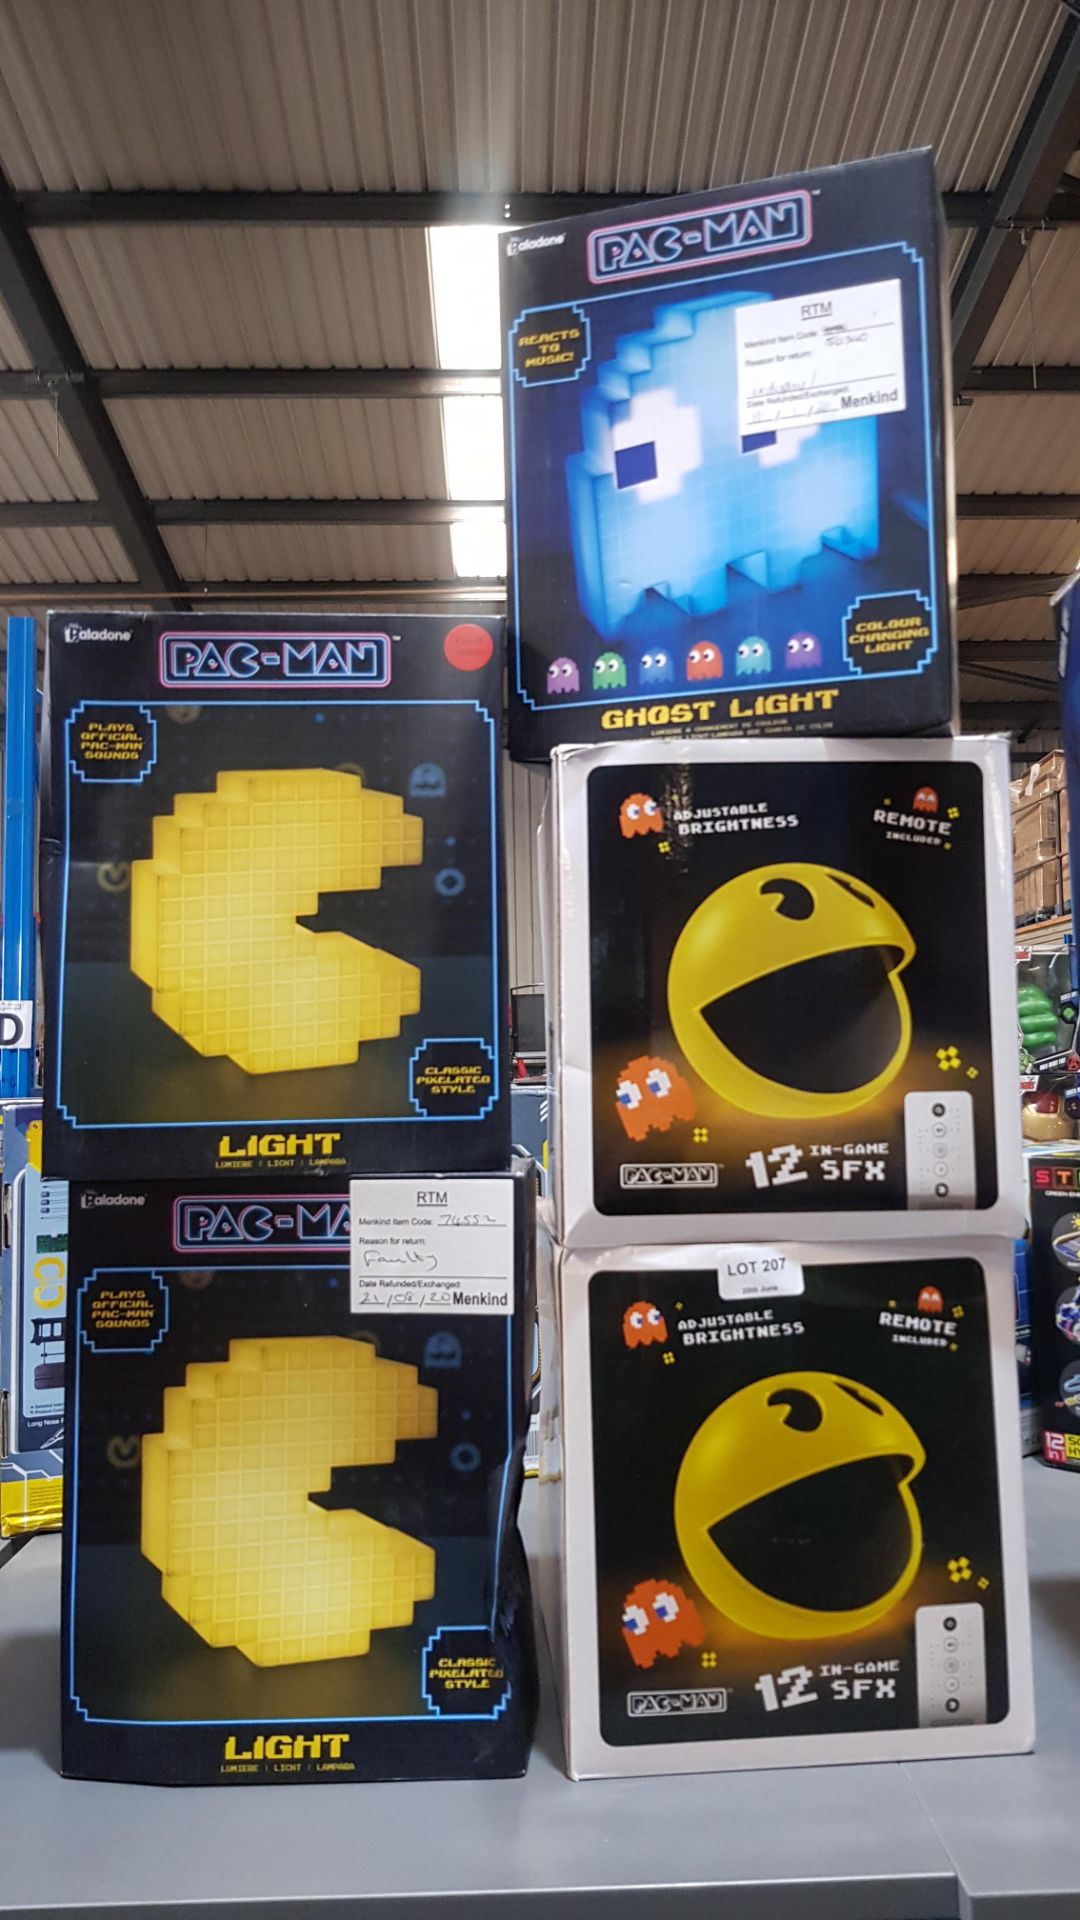 (R2C) 5 Items. 2x Pac Man Light With In Game SFX. 2x Paladone Pac Man Light With Sound. 1x Paladone - Image 4 of 4